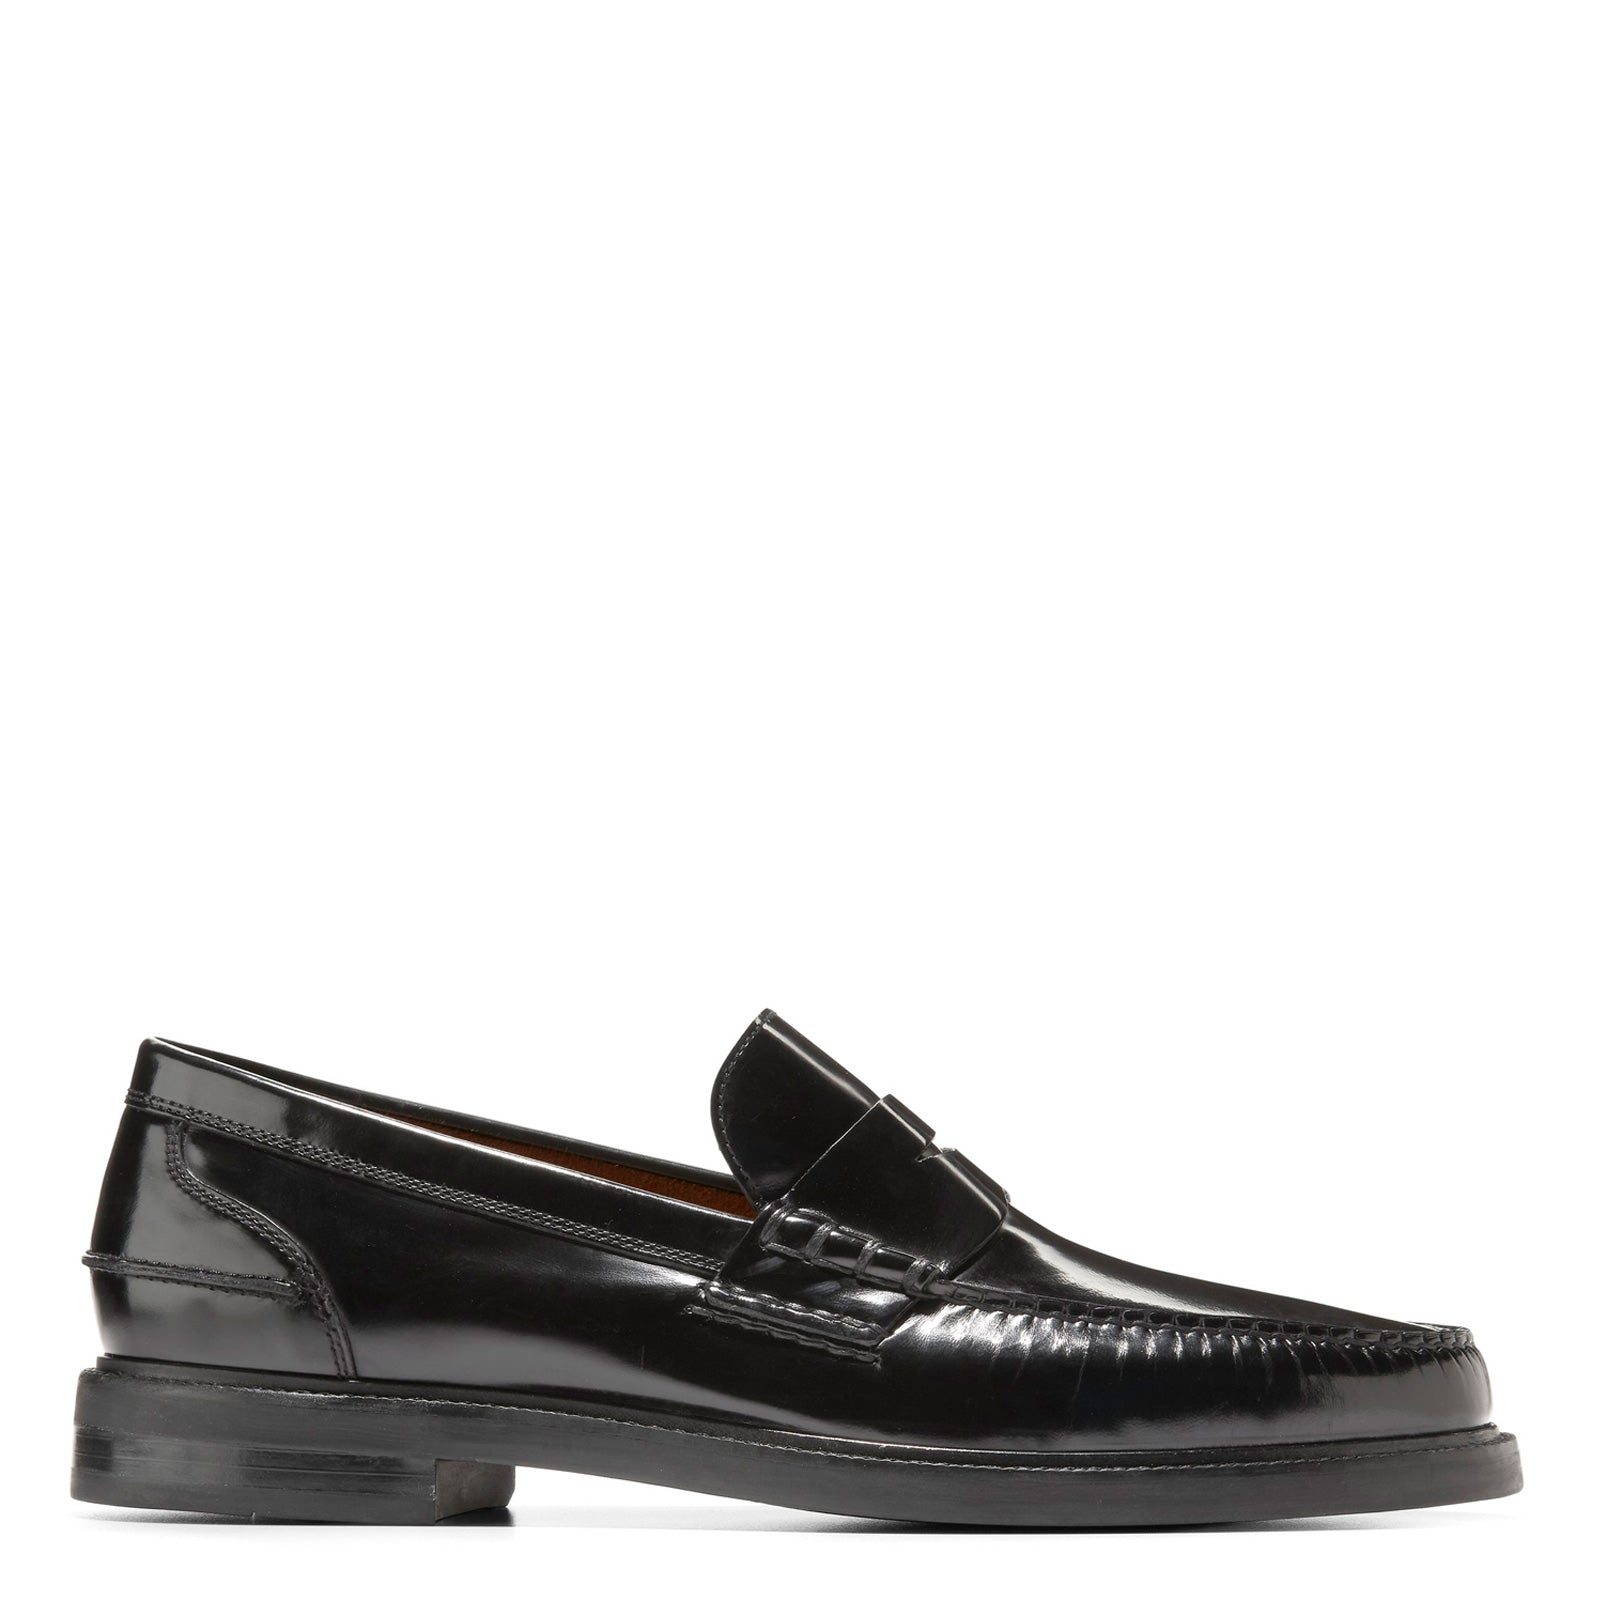 Men's Cole Haan, Pinch Prep Penny Loafer